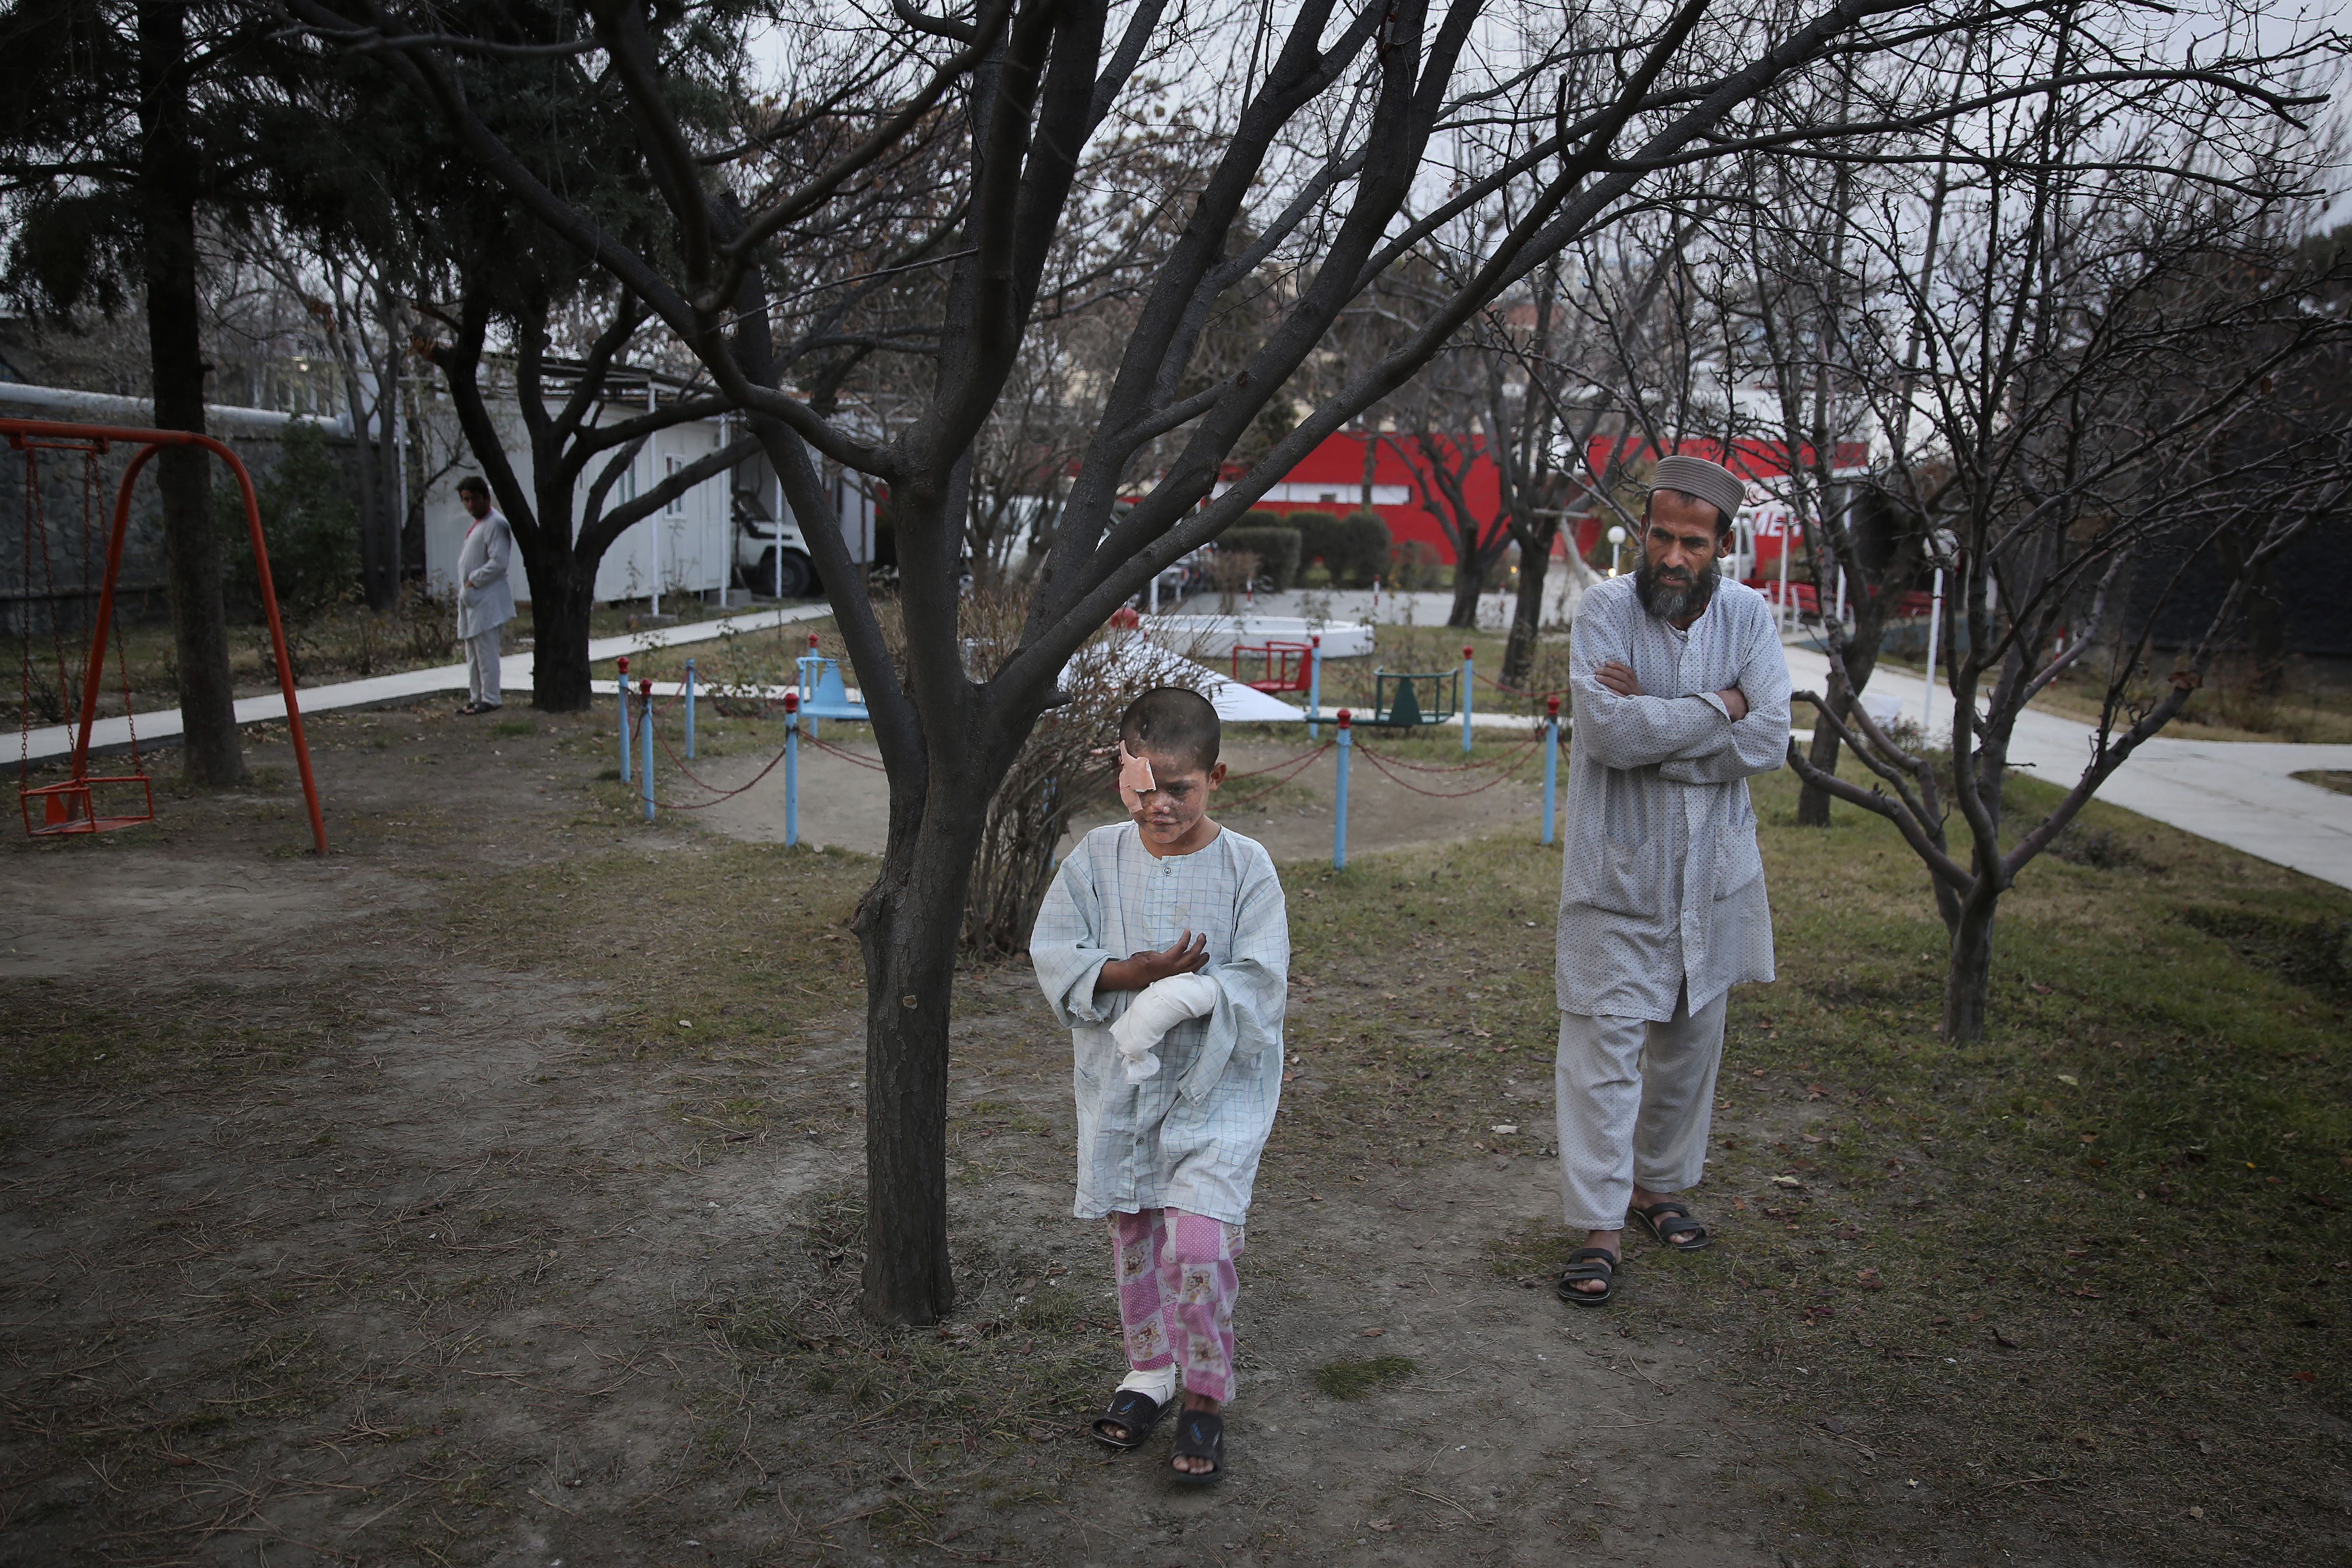 In this Thursday, Dec. 12, 2019, photo, Ismatullah follows his nine-year-old son Eimal, who has lost his right eye and several fingers on his hands in a landmine blast, as he tries to walk in the compound of Emergency Surgical Center for Civilian War Victims in Kabul, Afghanistan. The total number of children killed or maimed in more than four decades long Afghan war is not known. But, with a population where close to 50% are under the age of 20, the losses among the young is tremendous. (AP Photo/Altaf Qadri)